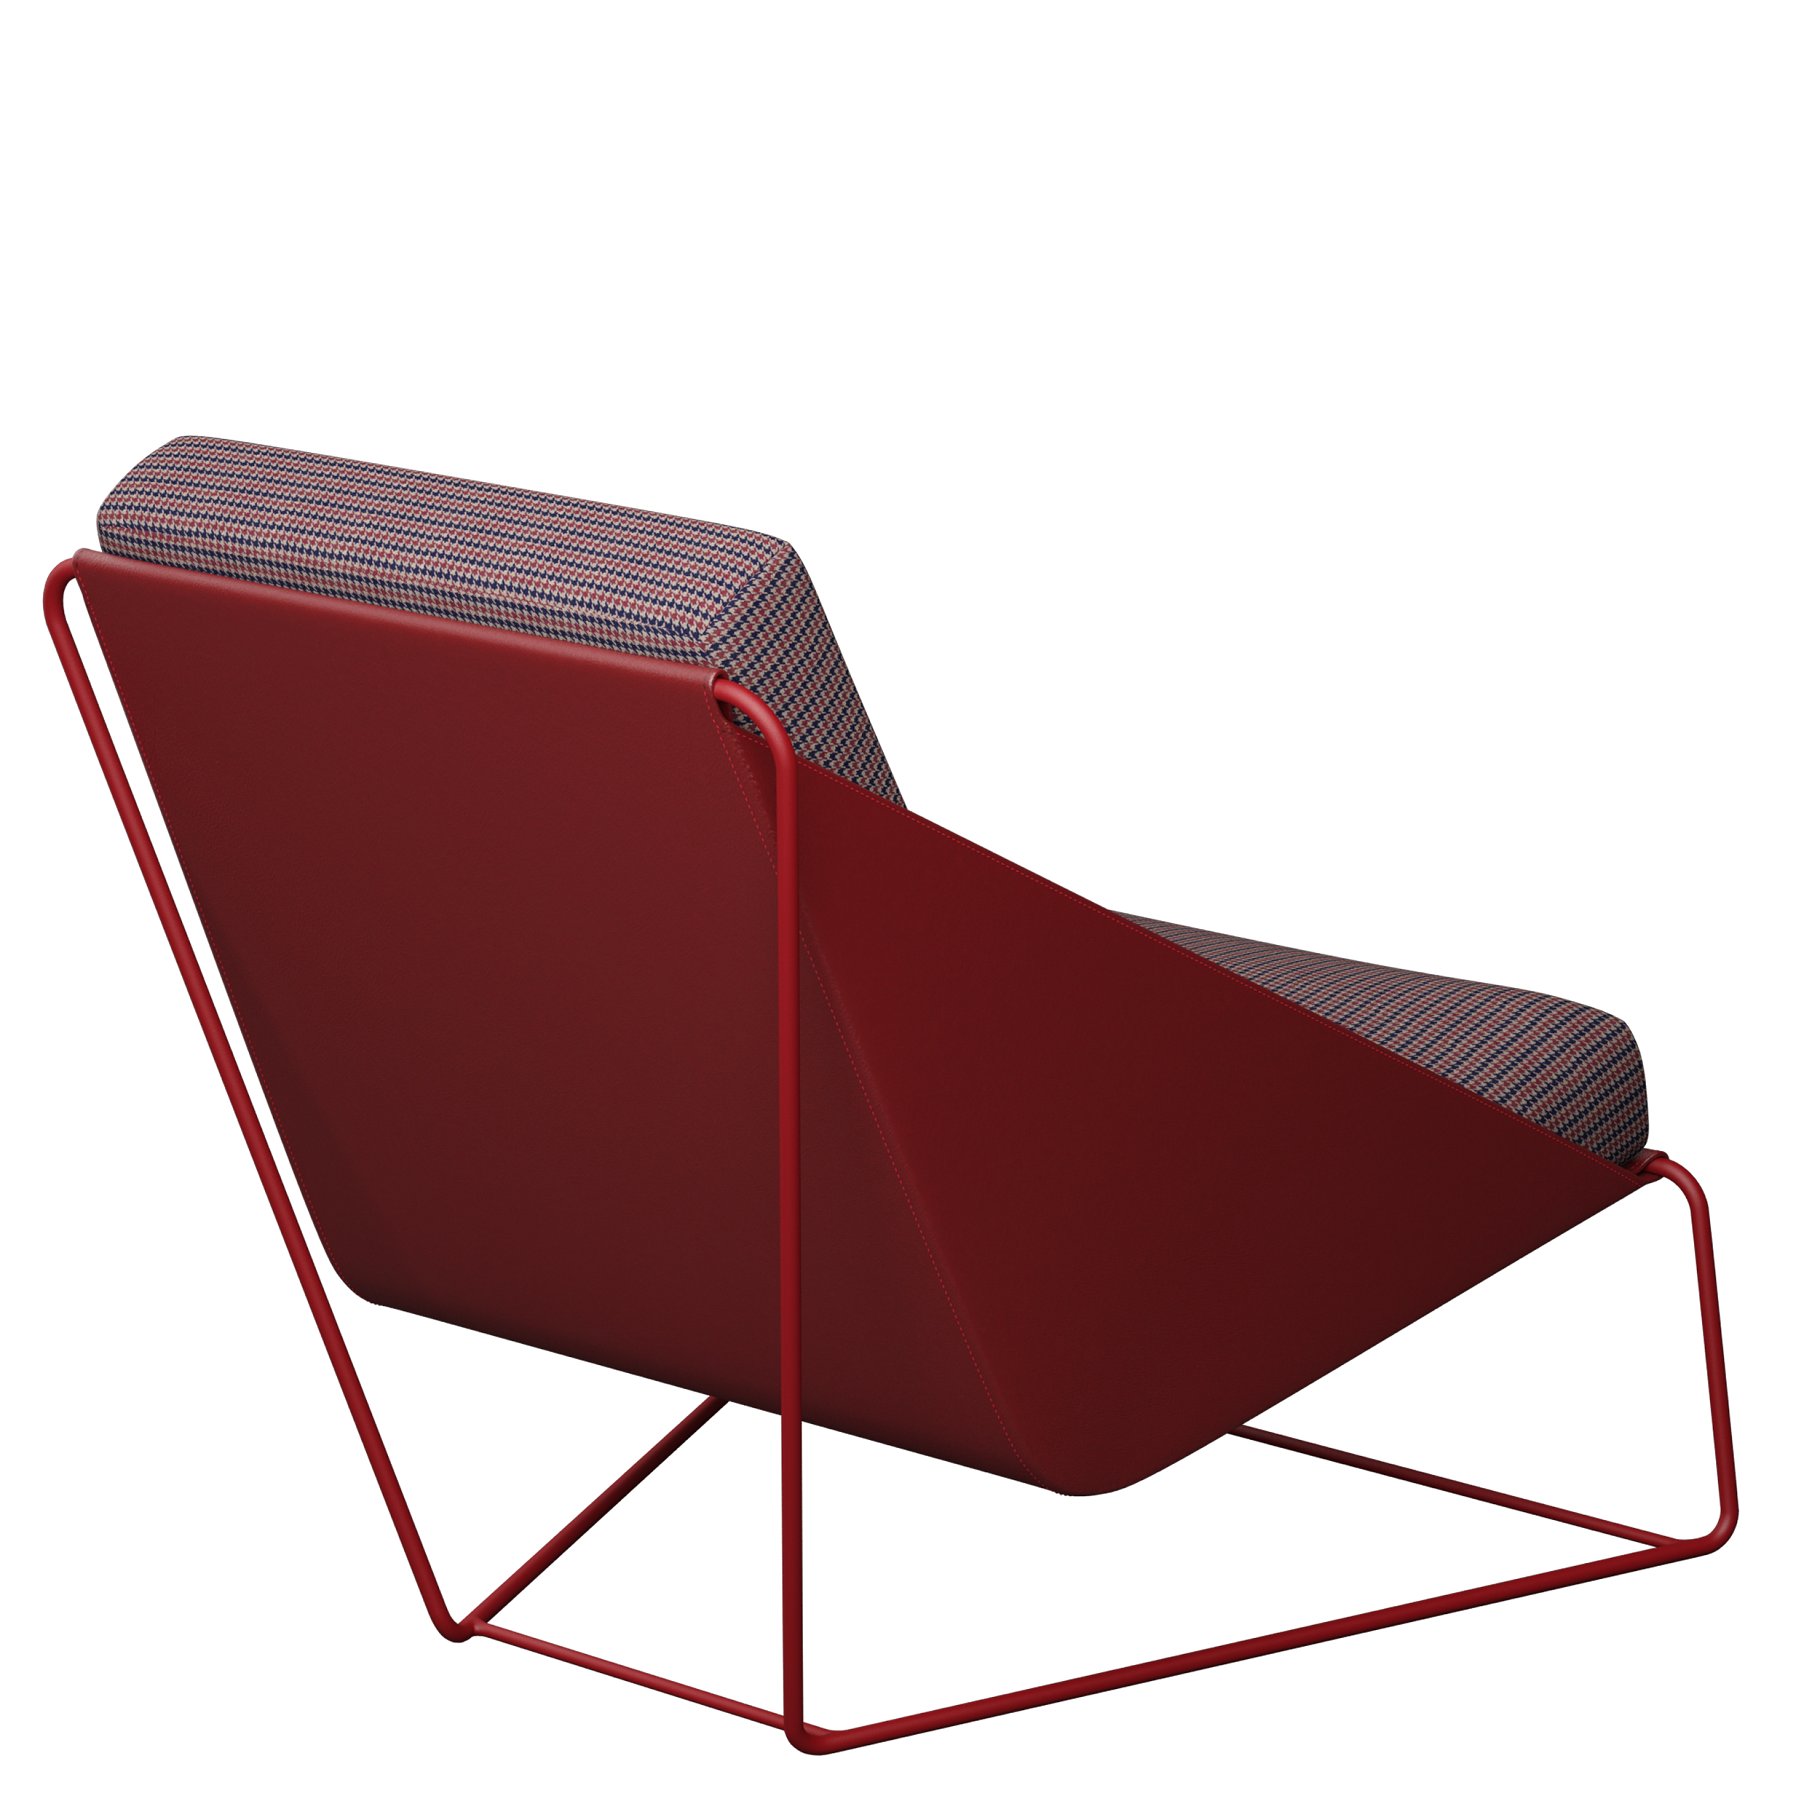 Rendering of an adorable 3d model of a red chair